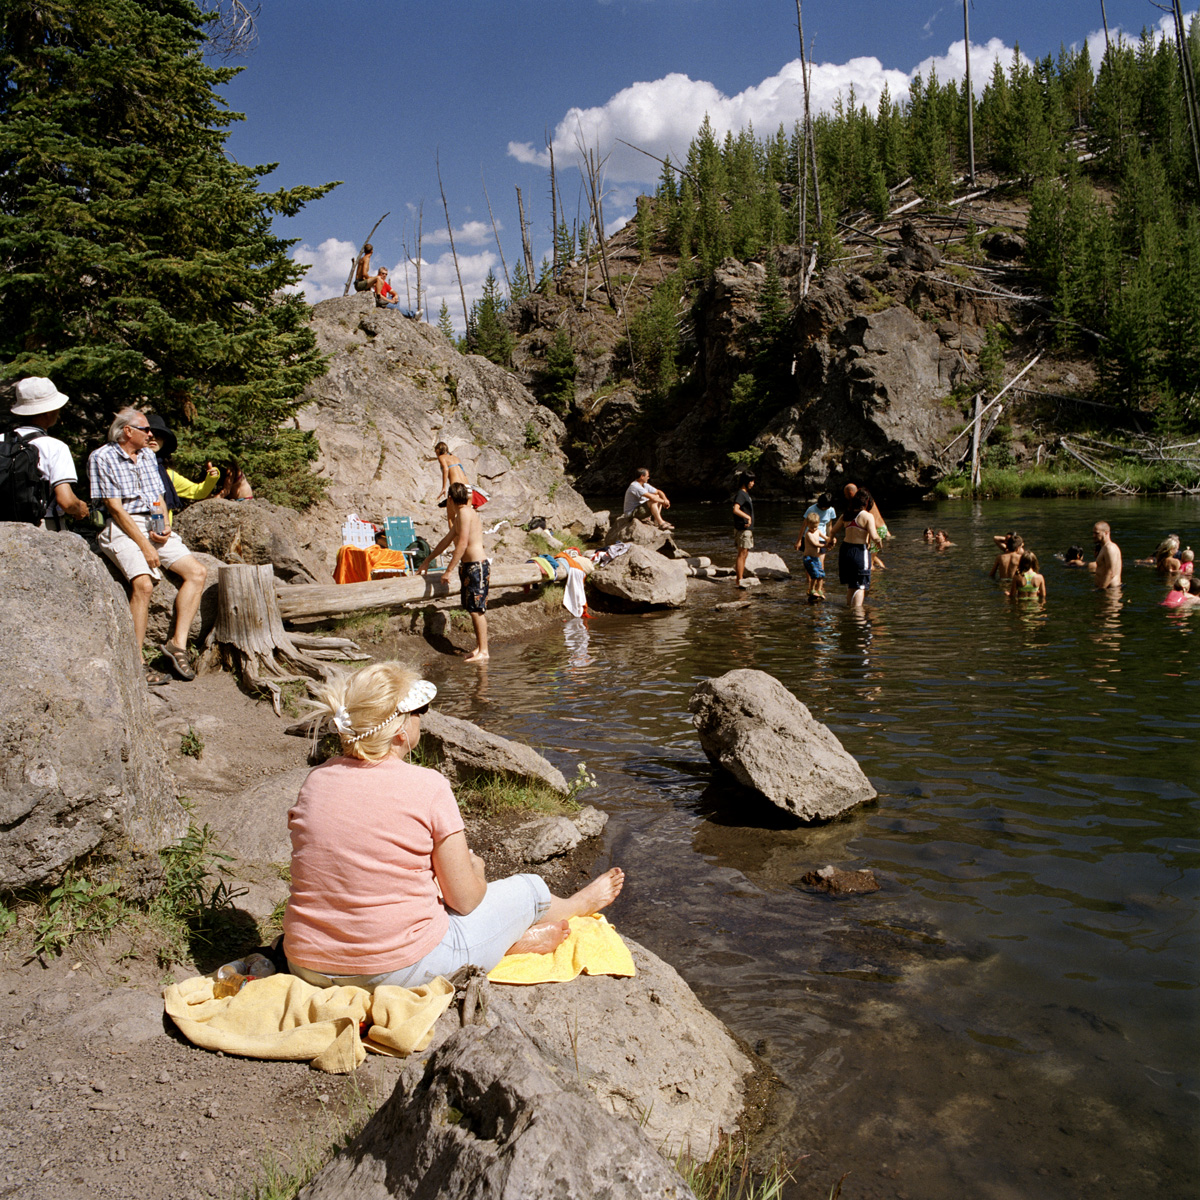 River Swimmers, Yellowstone National Park, WY